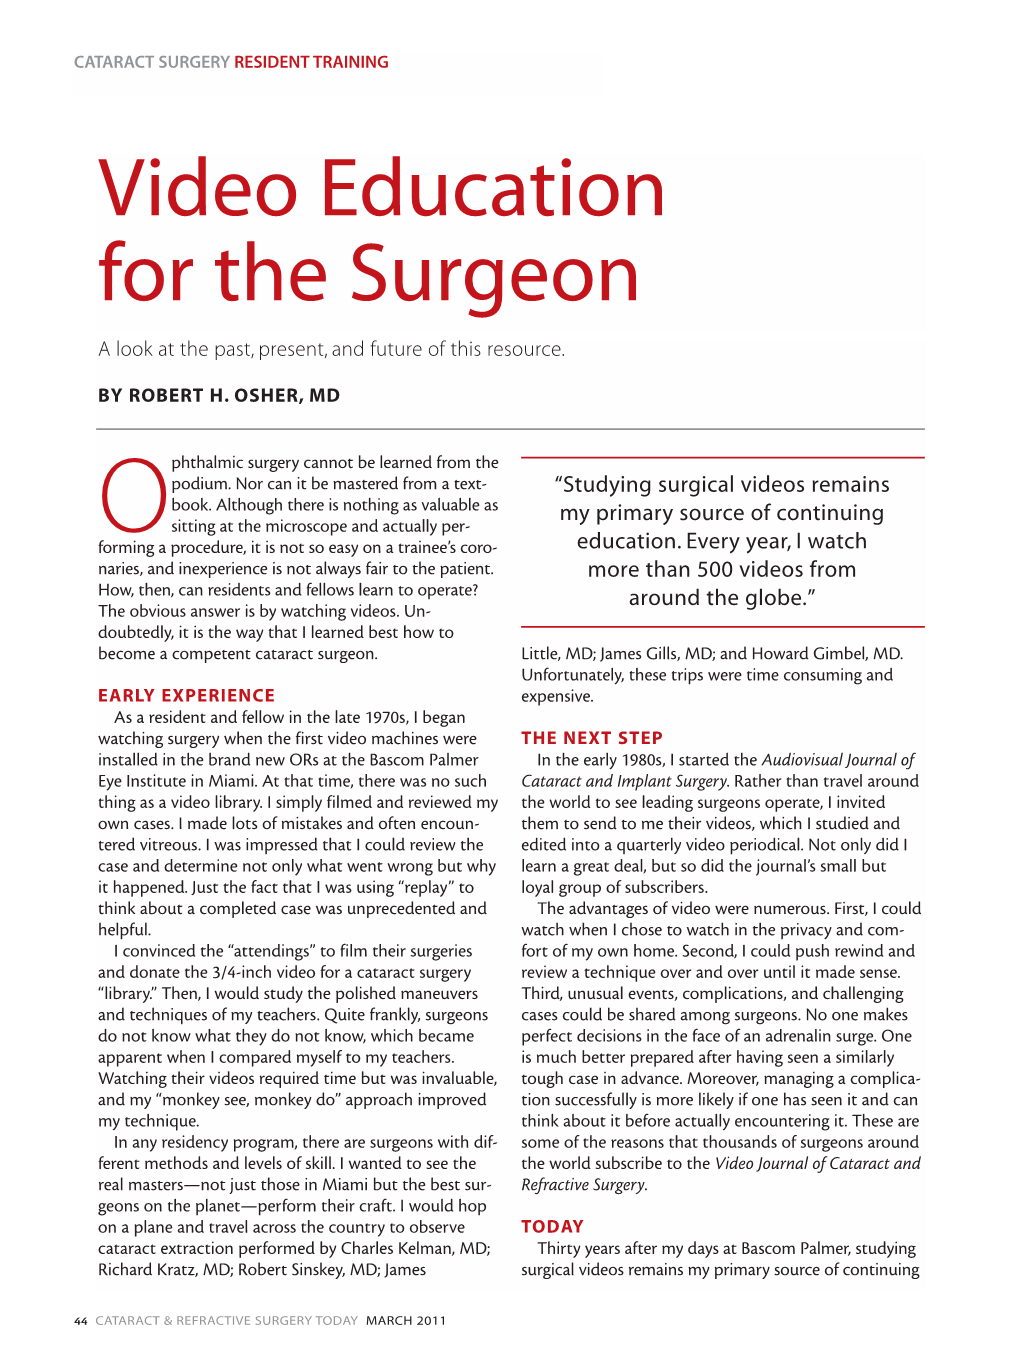 Video Education for the Surgeon